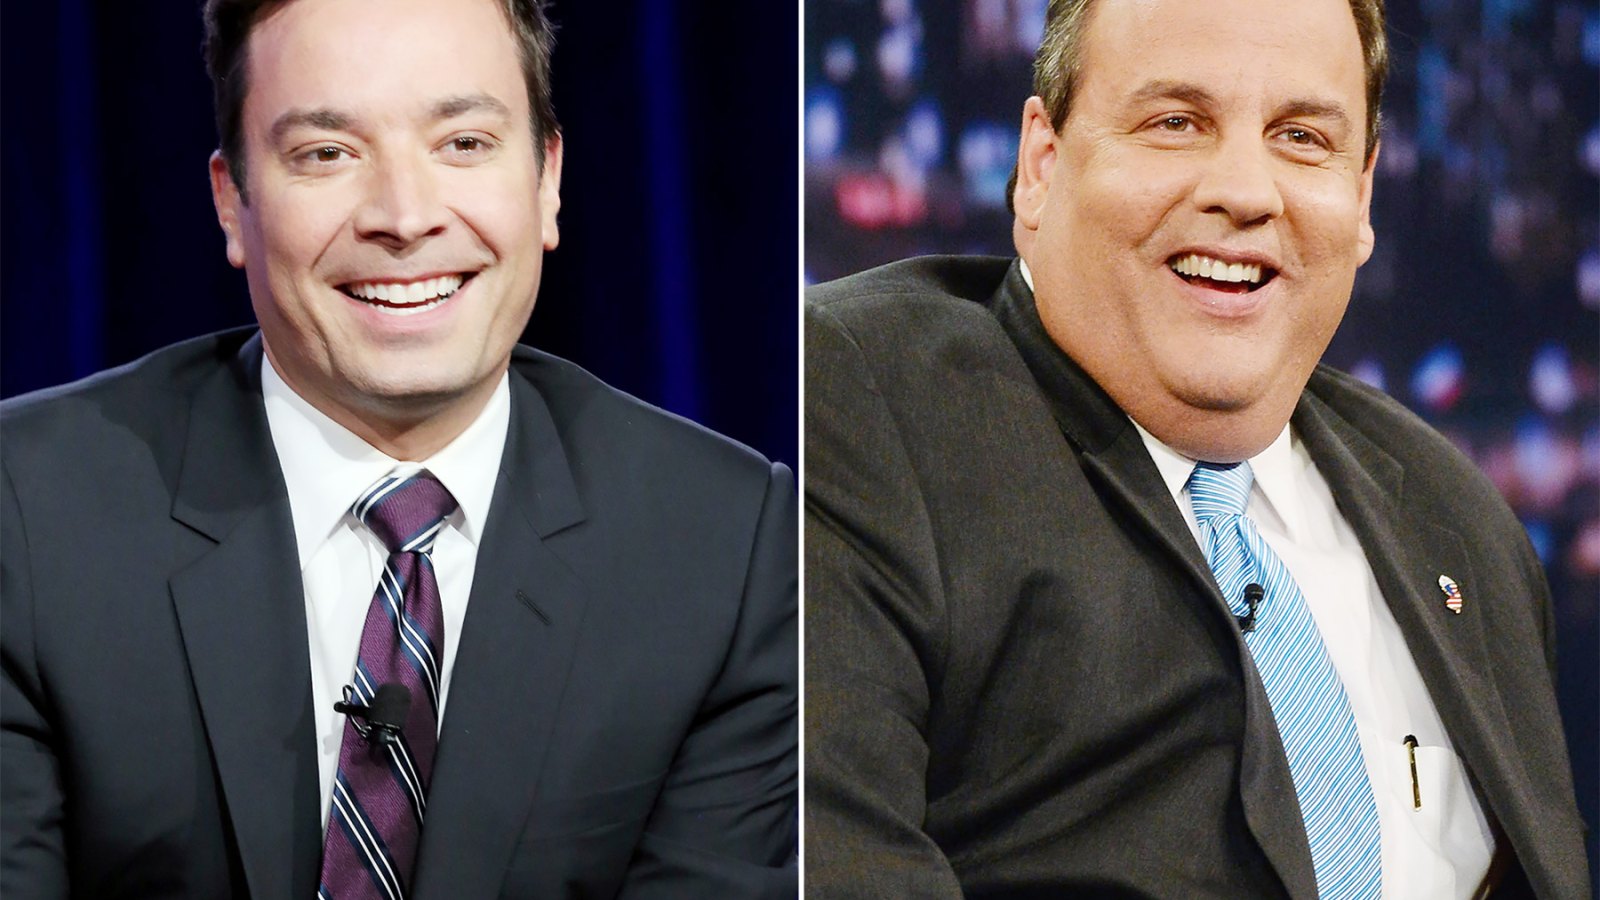 Jimmy Fallon and Chris Christie